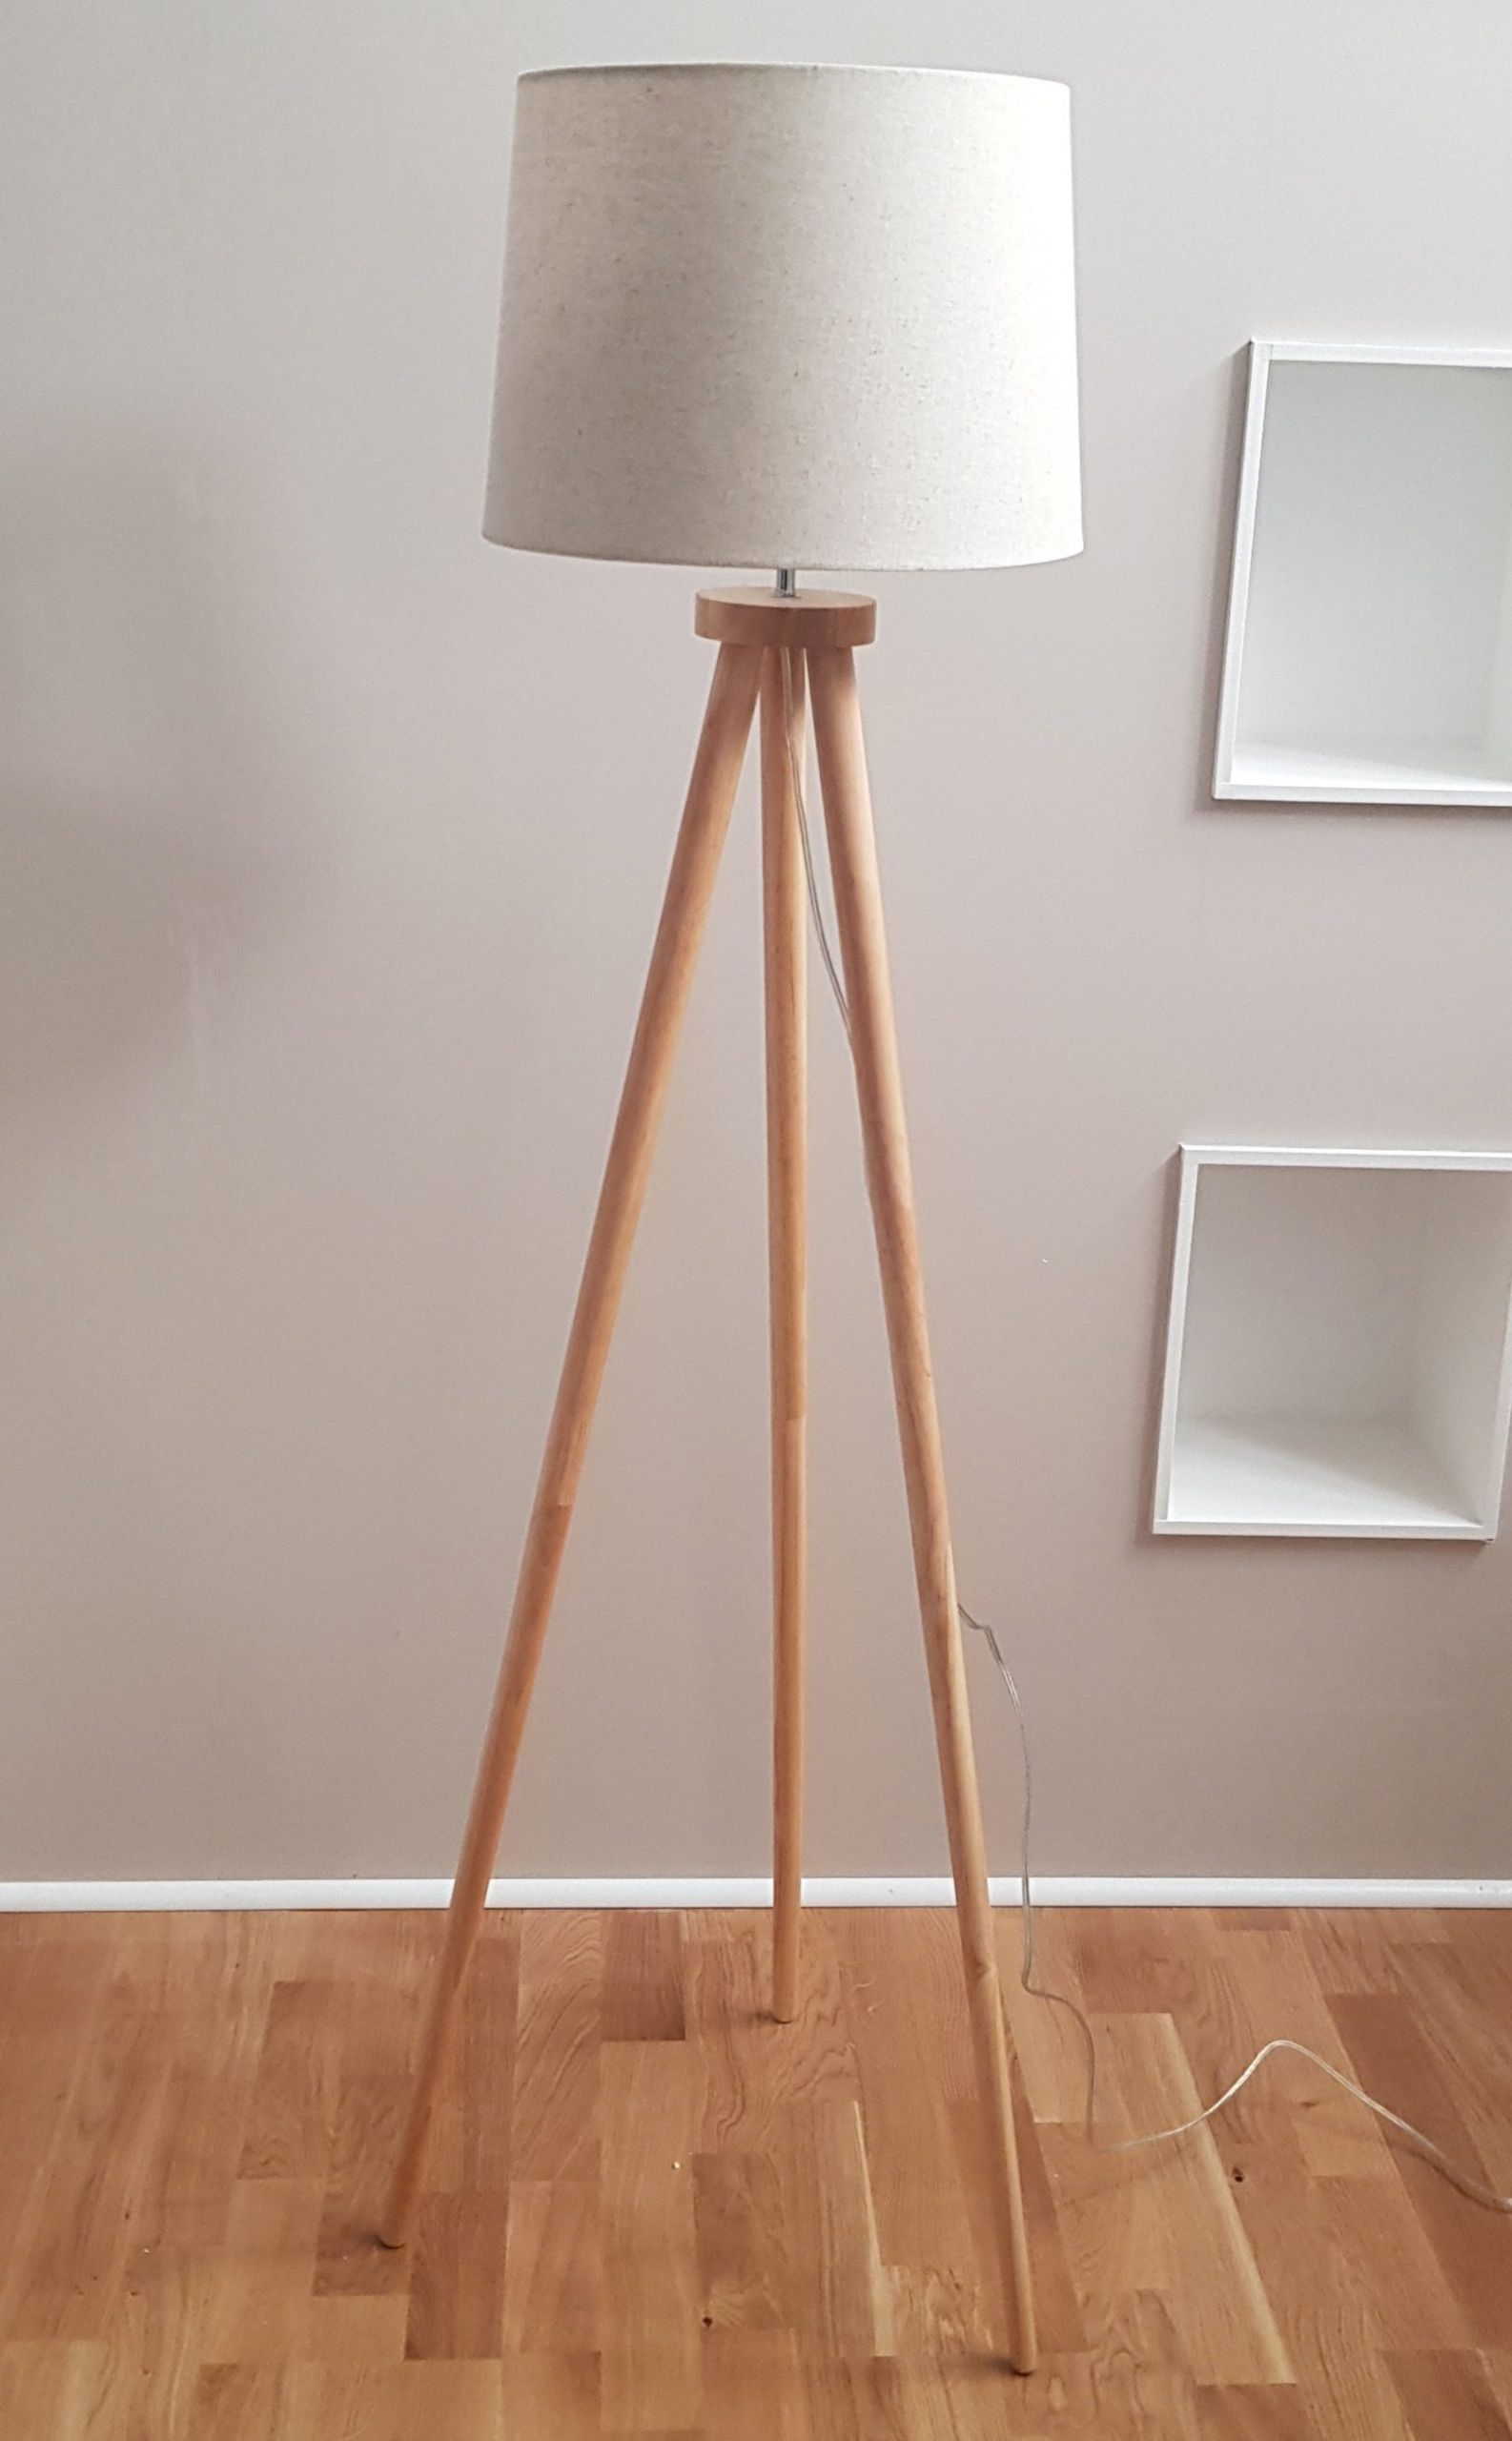 Chadwick Natural Wood Tripod Floor Lamp – Kliving In Wood Tripod Floor Lamps (View 5 of 20)